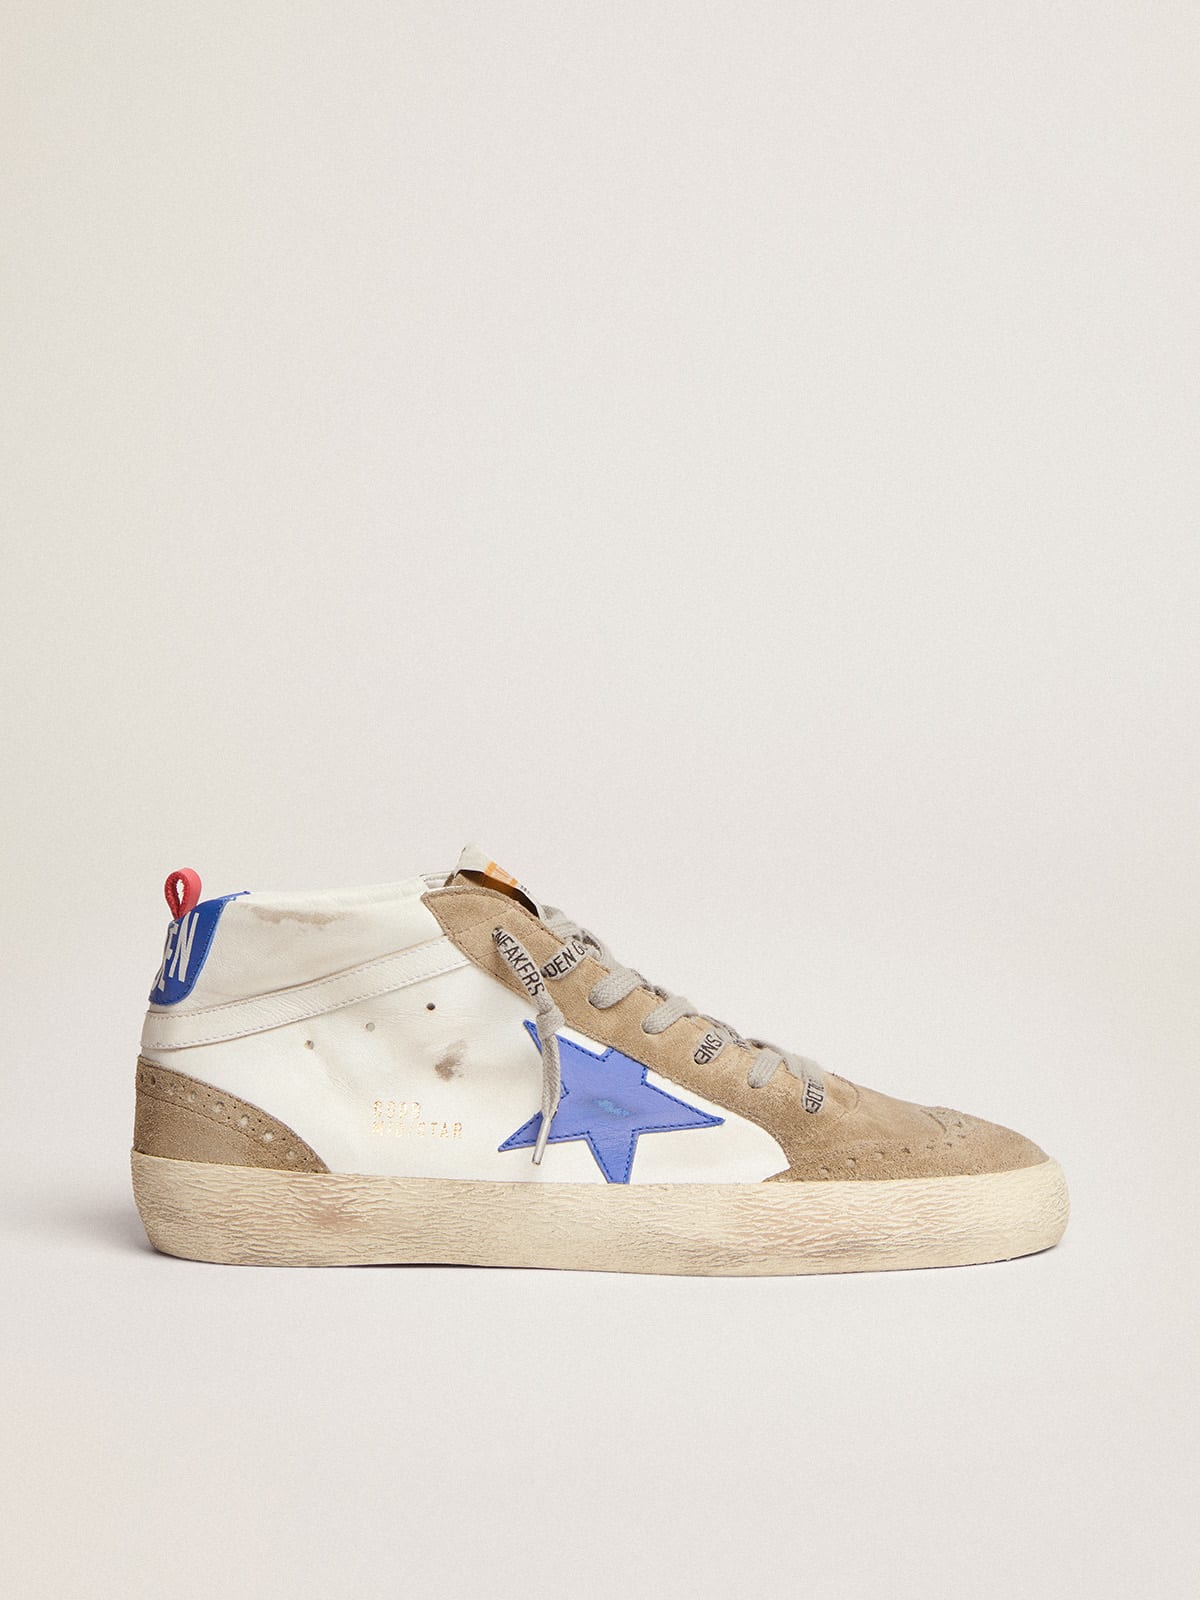 Mid Star sneakers in white leather with blue star and dove-gray inserts